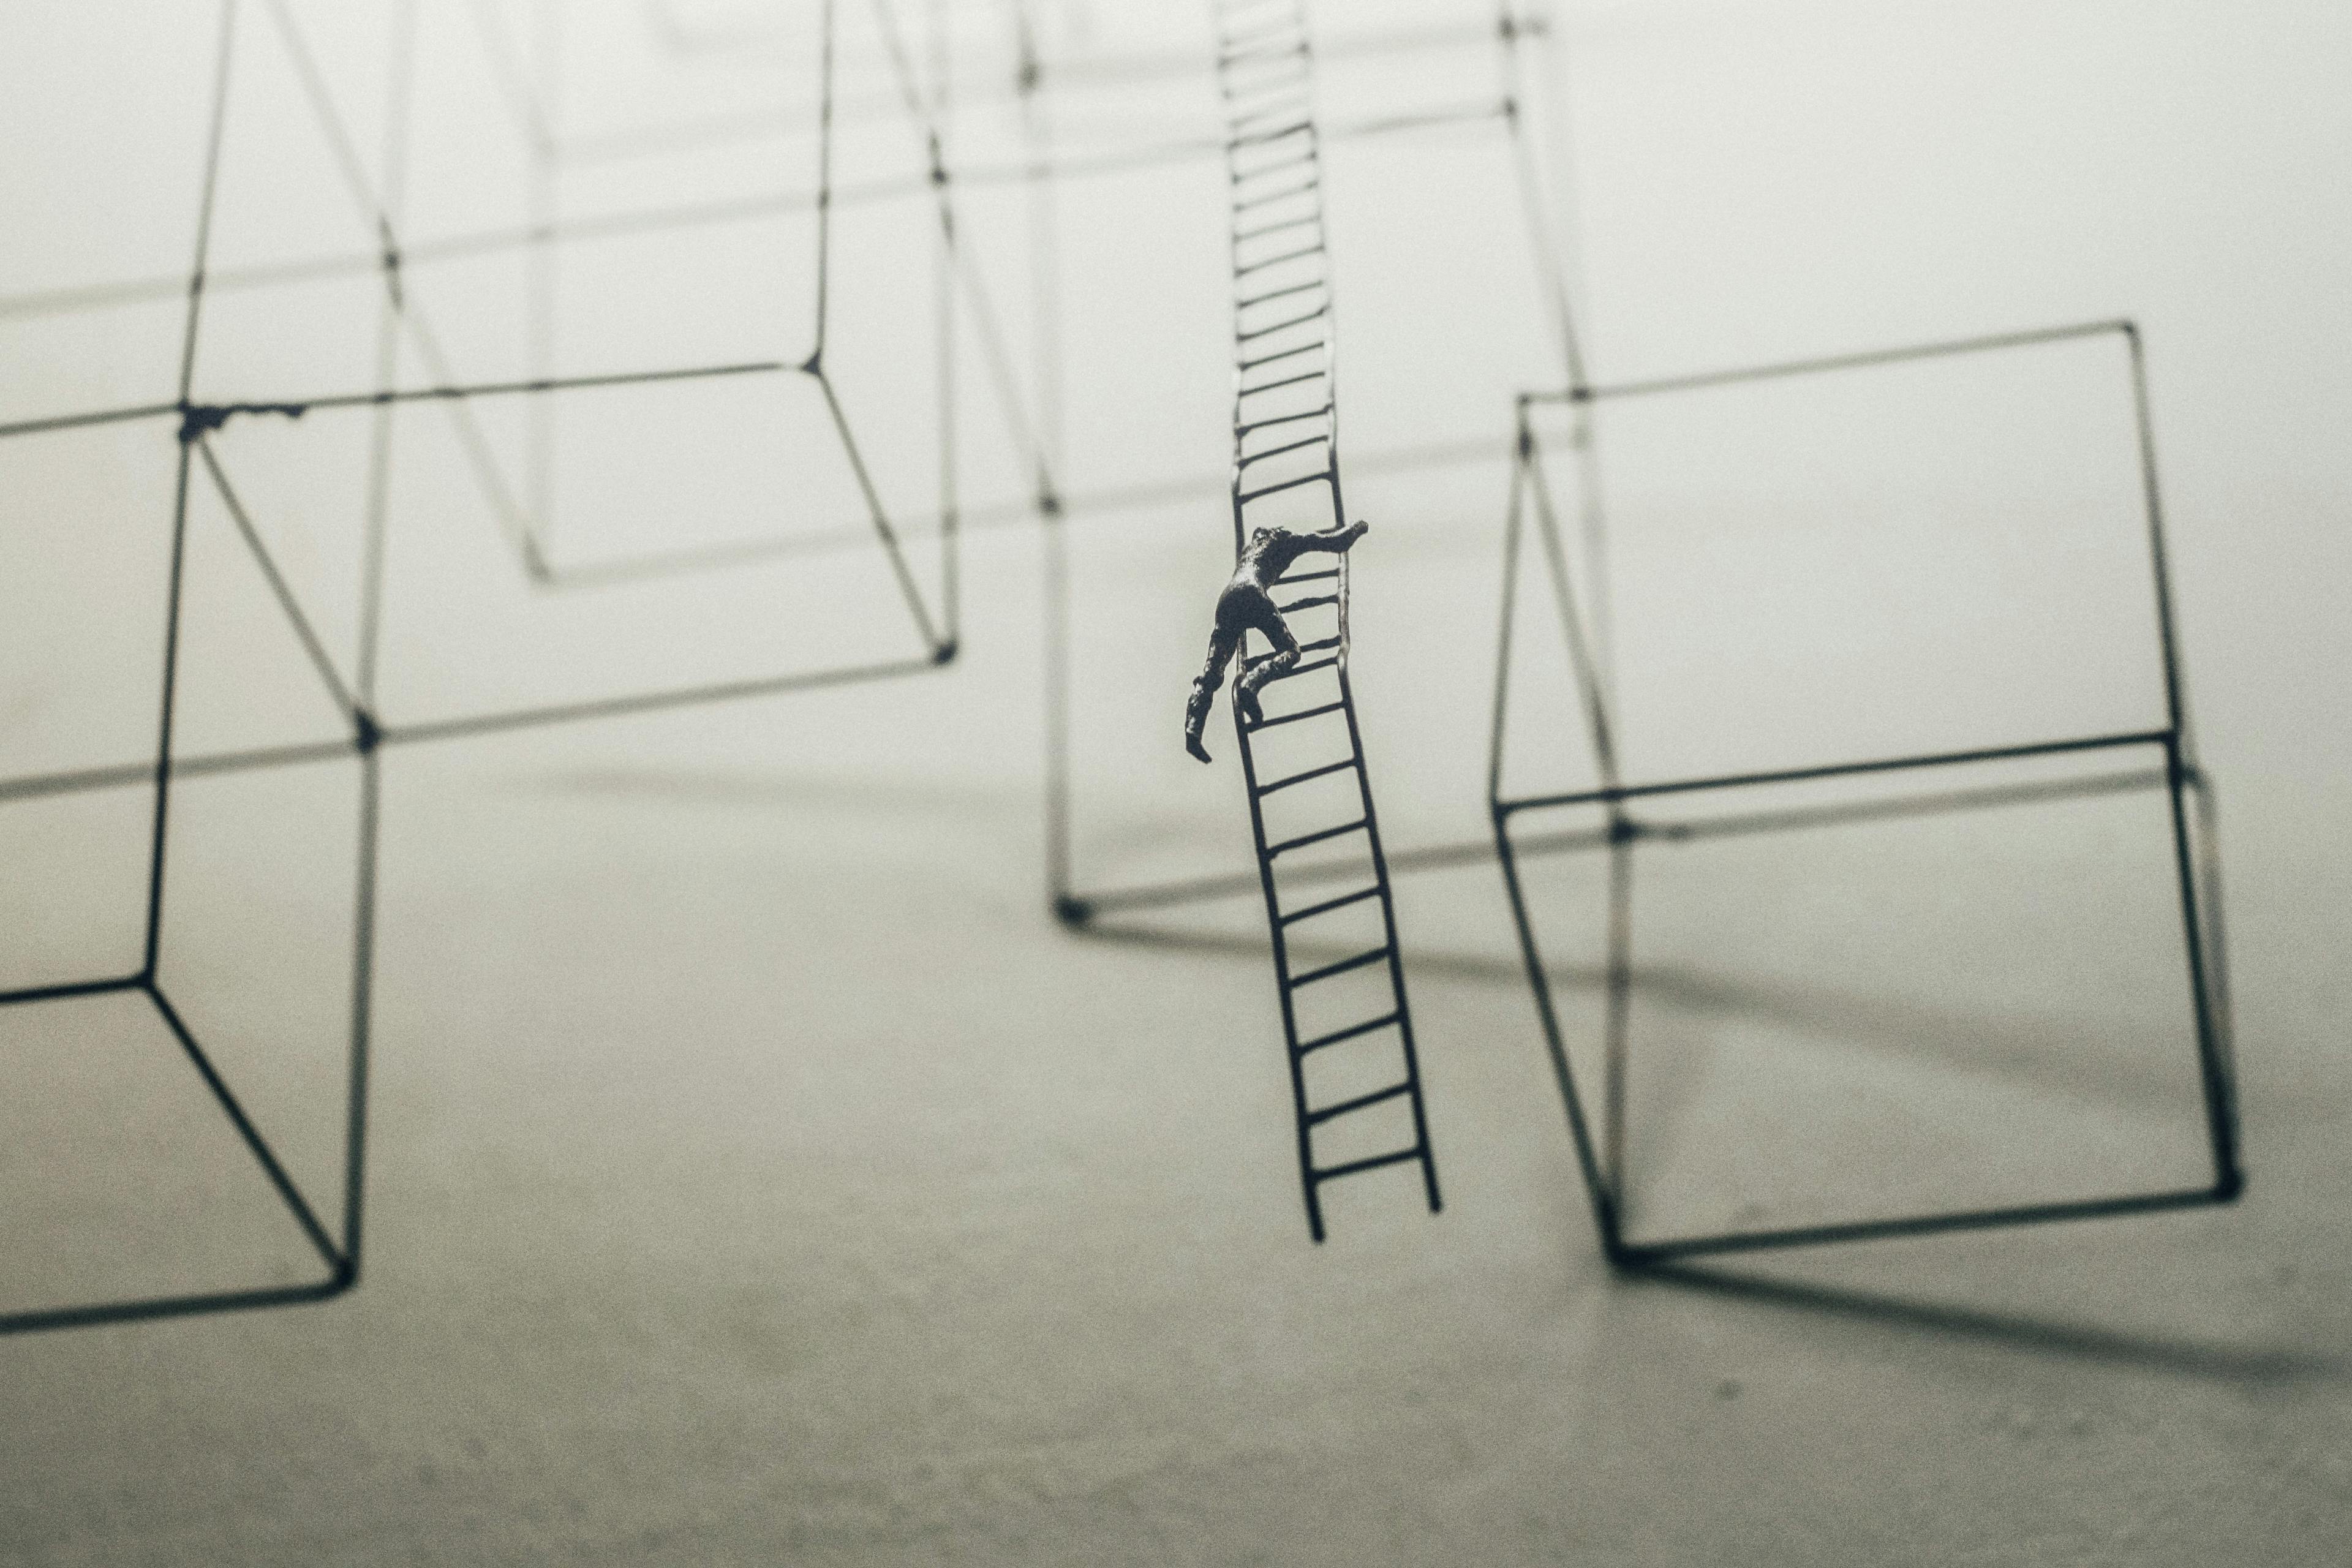 guy climbing ladder amidst square frames